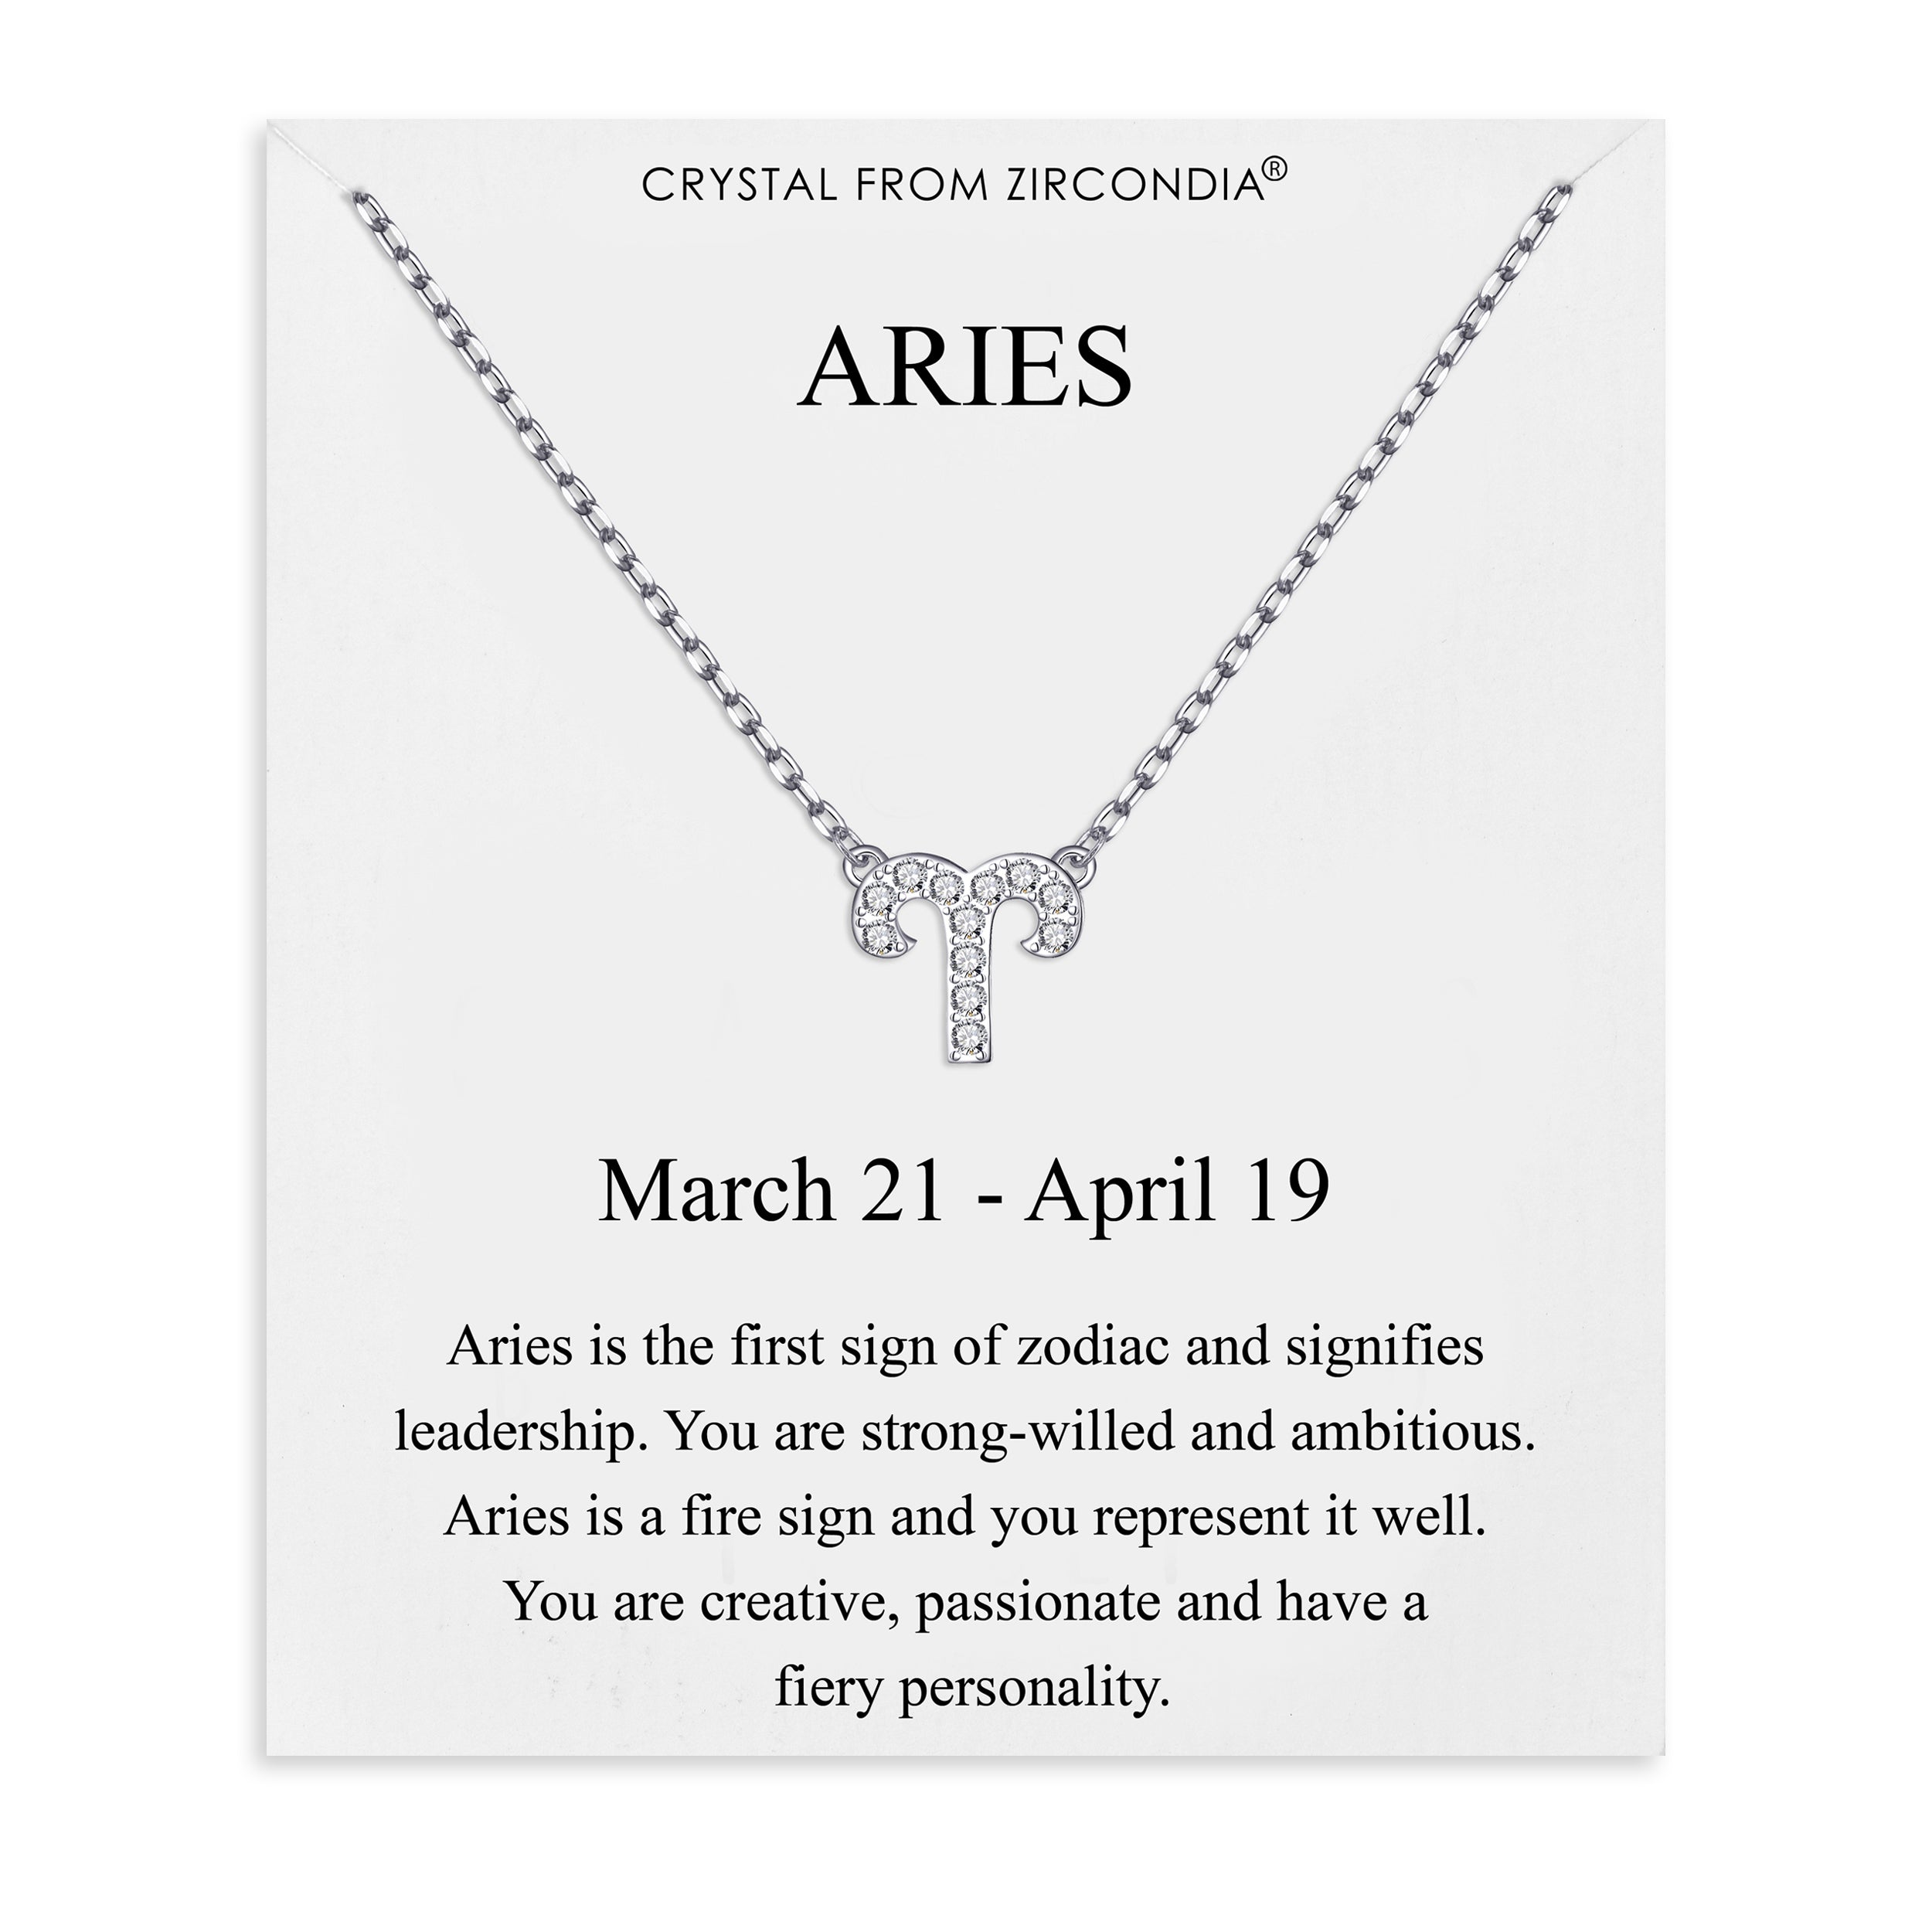 Aries Zodiac Star Sign Necklace Created with Zircondia® Crystals by Philip Jones Jewellery